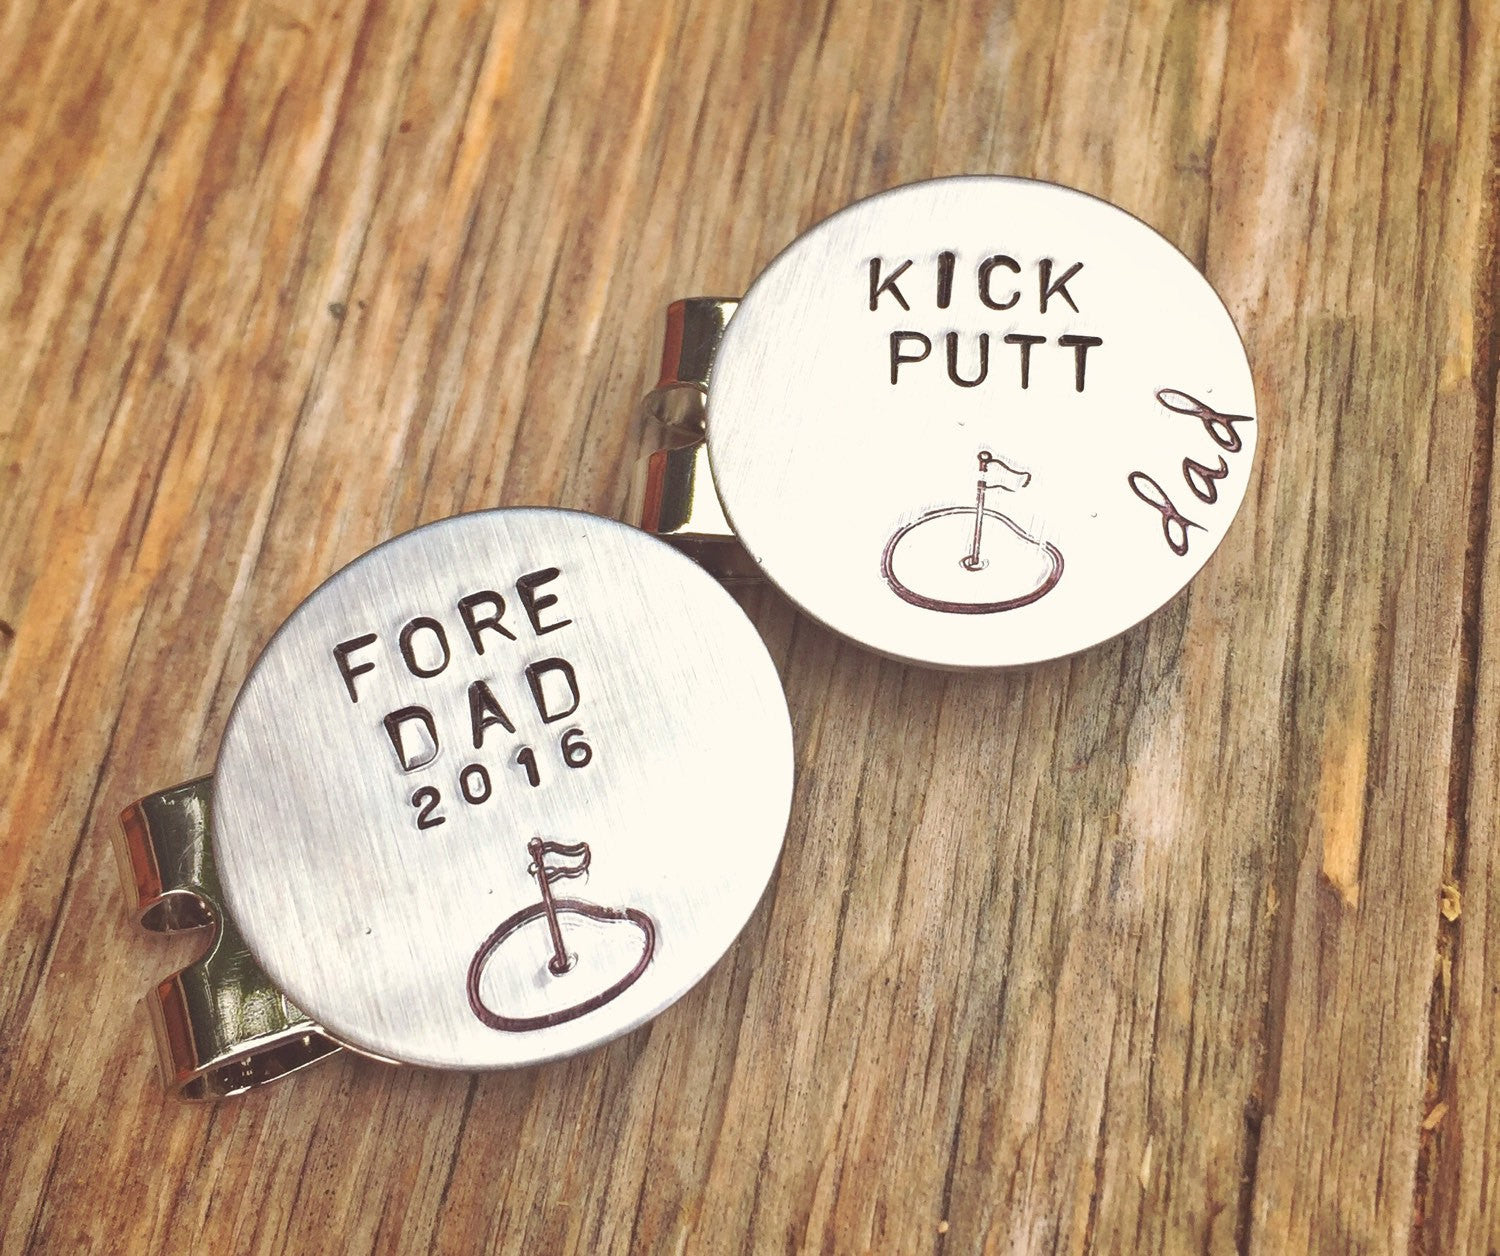 Husband Gift, Golf Marker, Boyfriend Gifts, Golf Gifts, Personalized Golf Marker, Hat Clip, Gifts for Dad, natashaaloha - Natashaaloha, jewelry, bracelets, necklace, keychains, fishing lures, gifts for men, charms, personalized, 